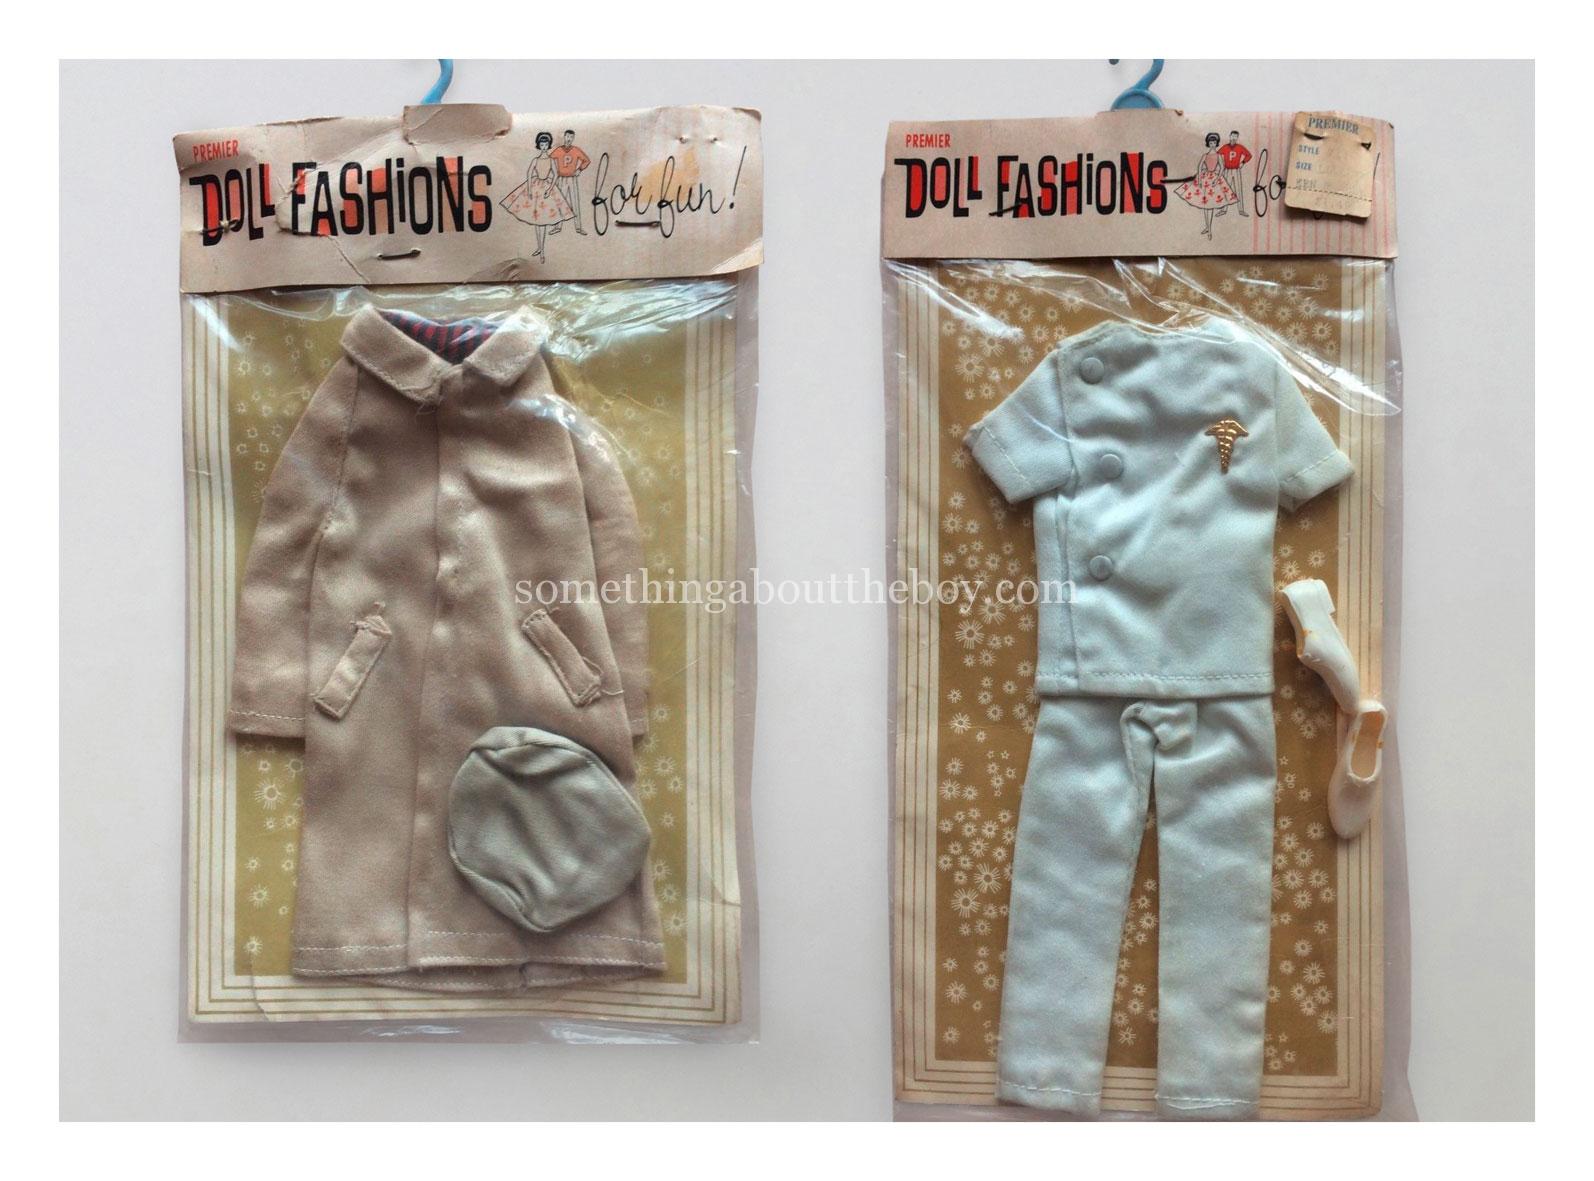 Trenchcoat & Doctor uniform by Premier Doll Togs Inc.